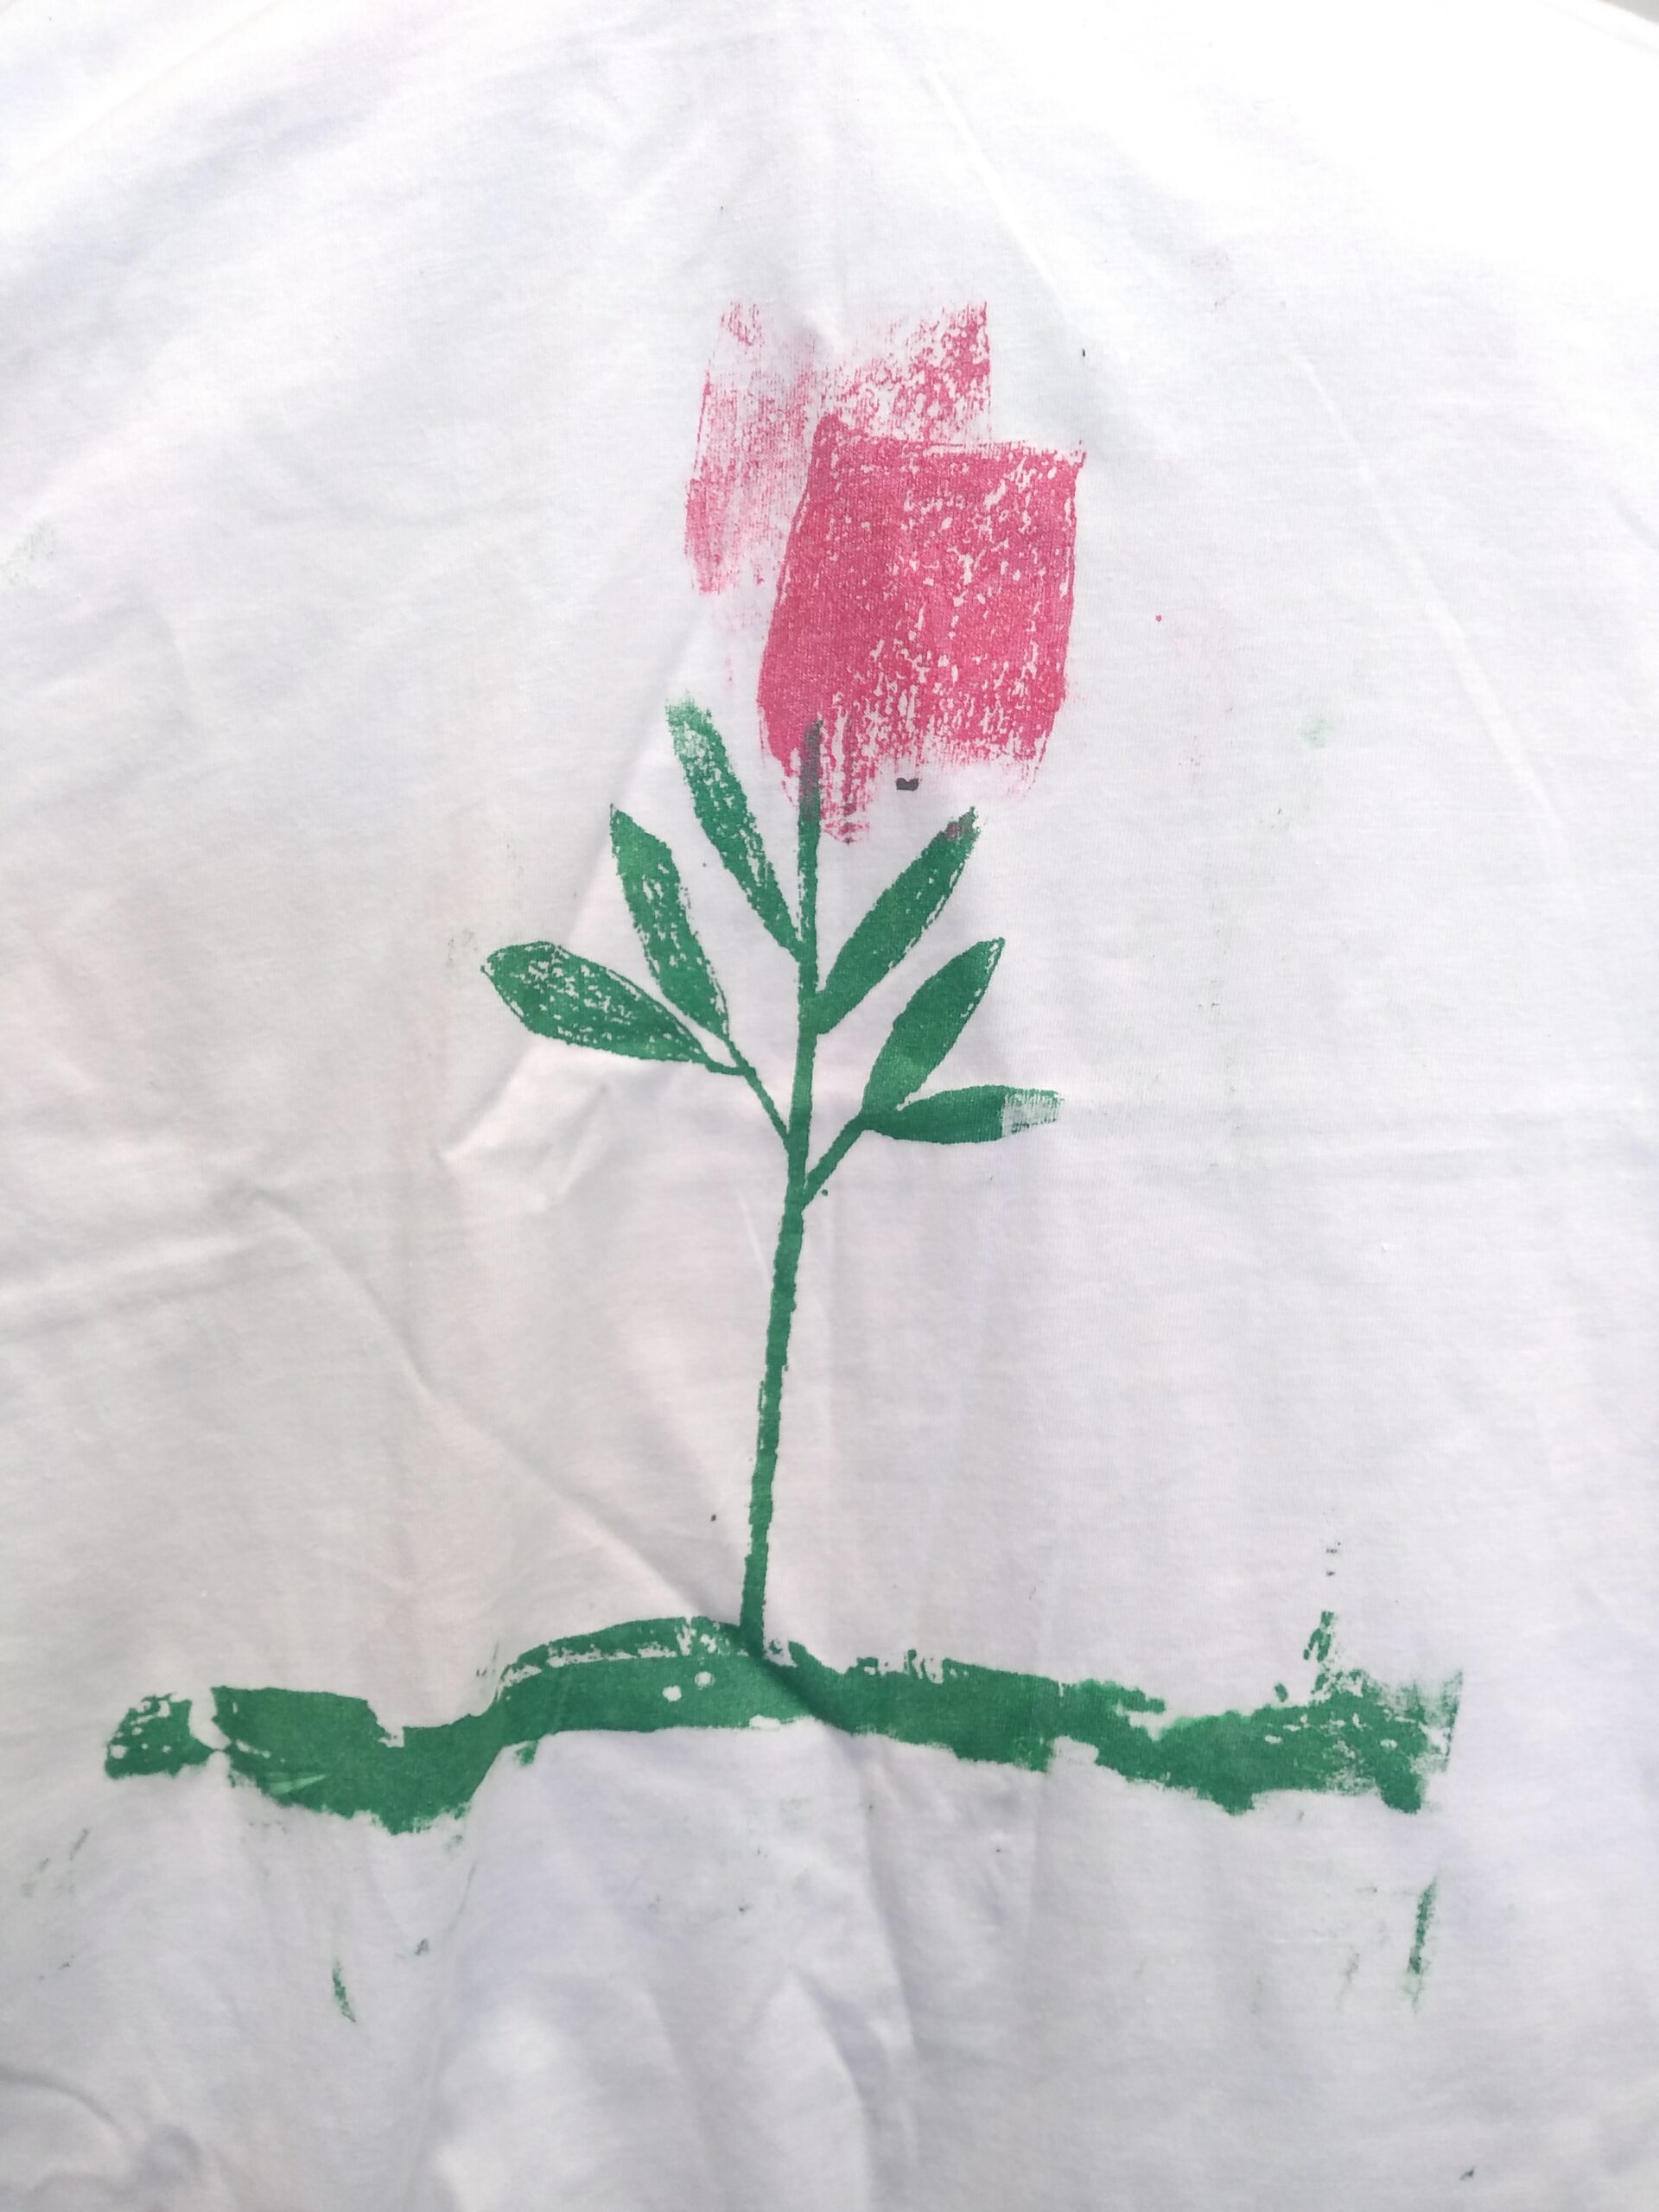 Red rose with green stem and leaves on a green coloured ground on white shirt.